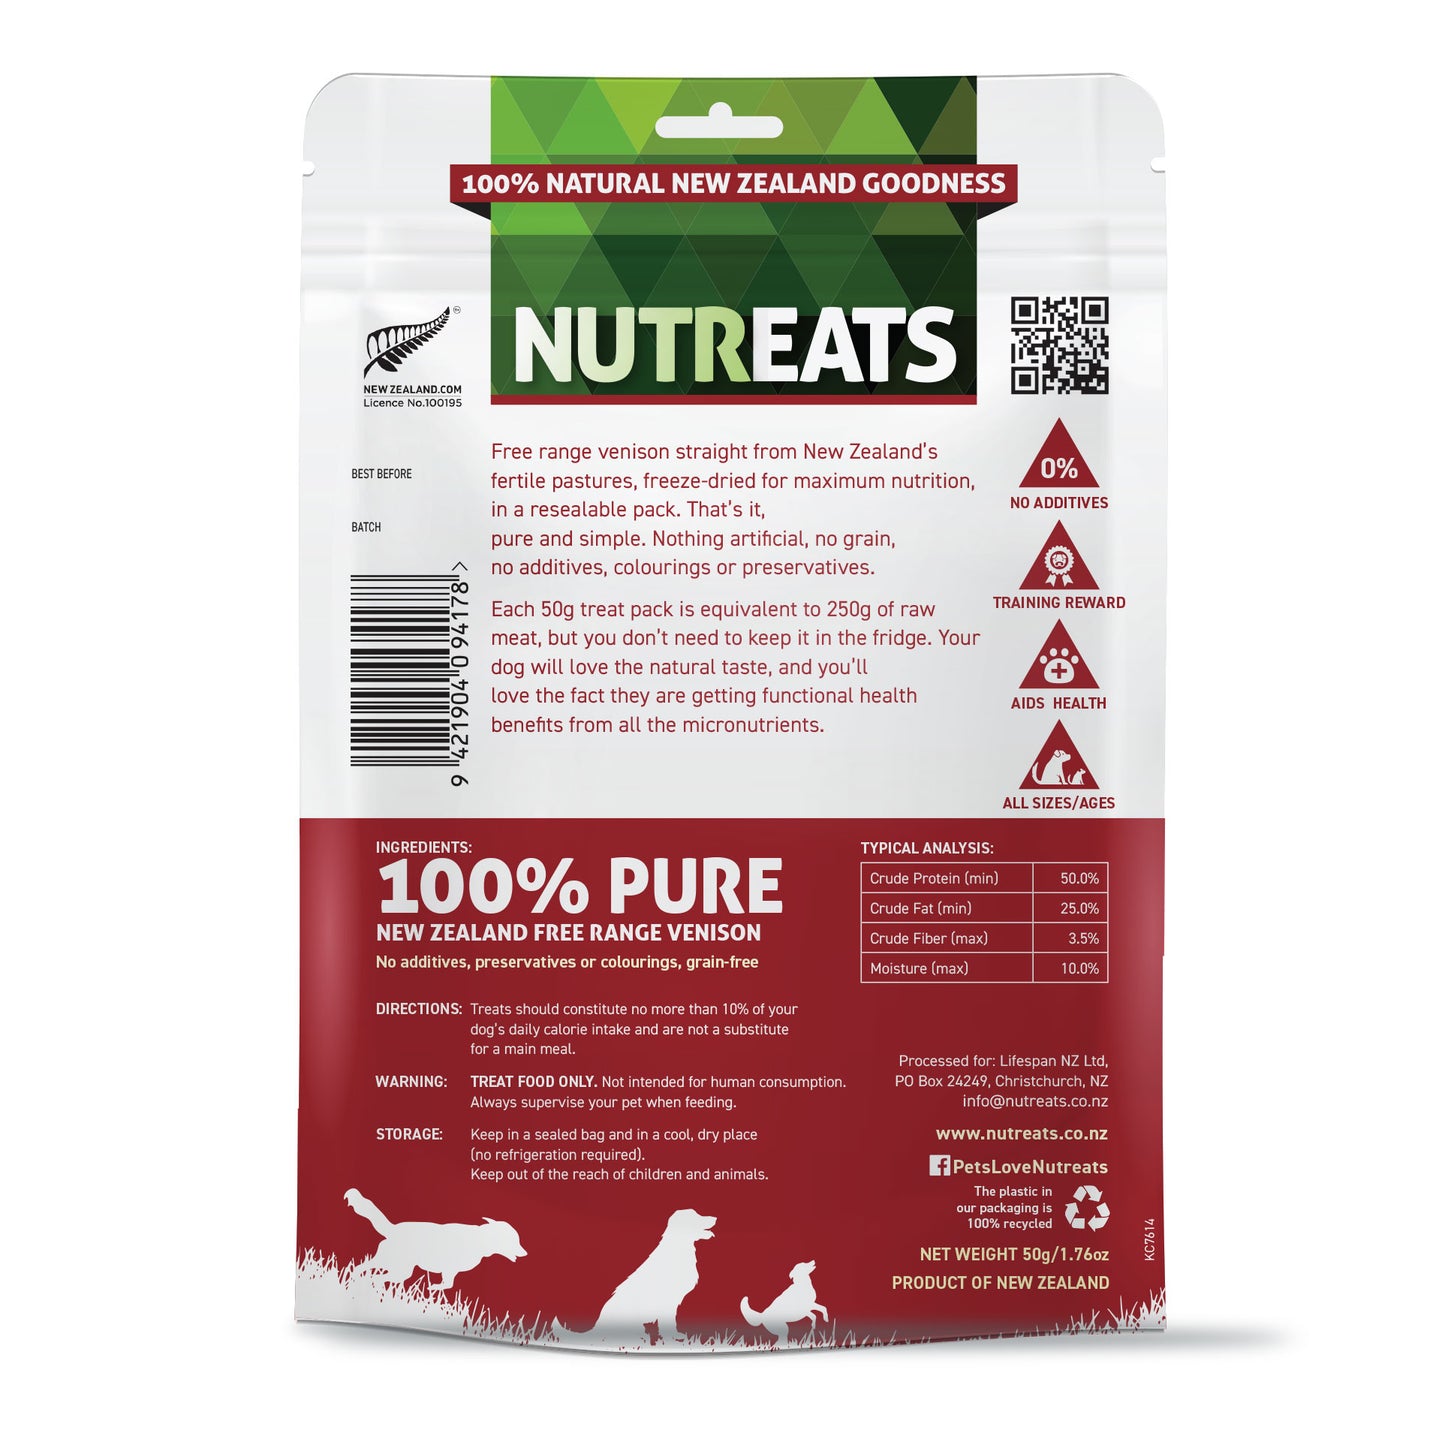 Nutreats New Zealand free range venison dog treats supporting digestive balance rich in vitamins and minerals. Easy to digest protein treat for your dog that supports their health. No additives, training reward your dog will love, aids health and suitable for all sizes and ages of dog. 